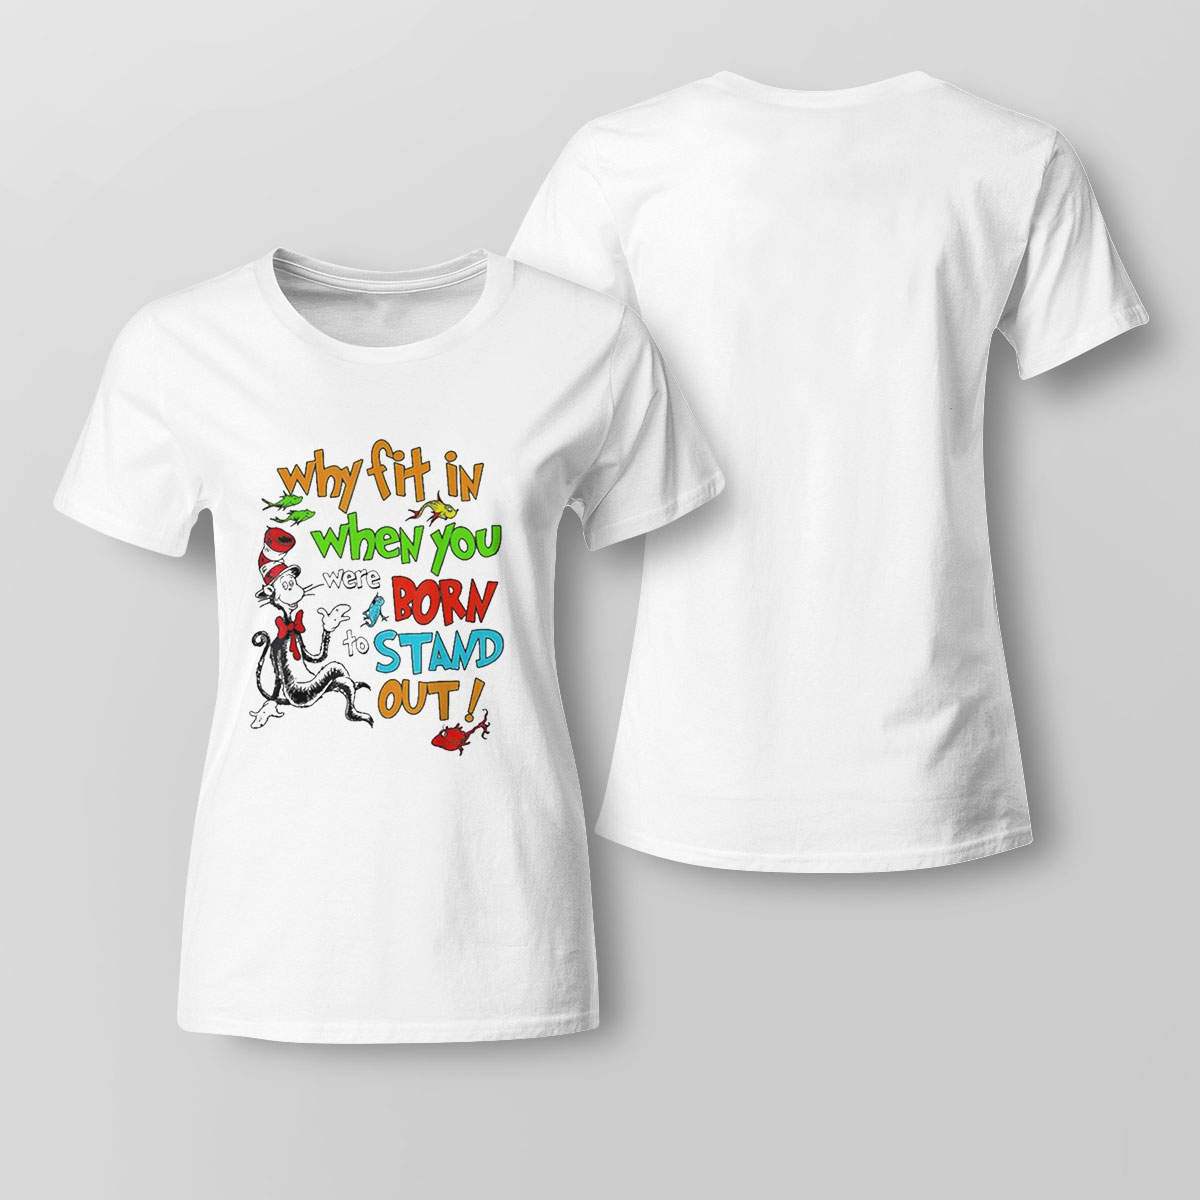 Why Fit In When You Were Born Stand Out Shirt Ladies Tee